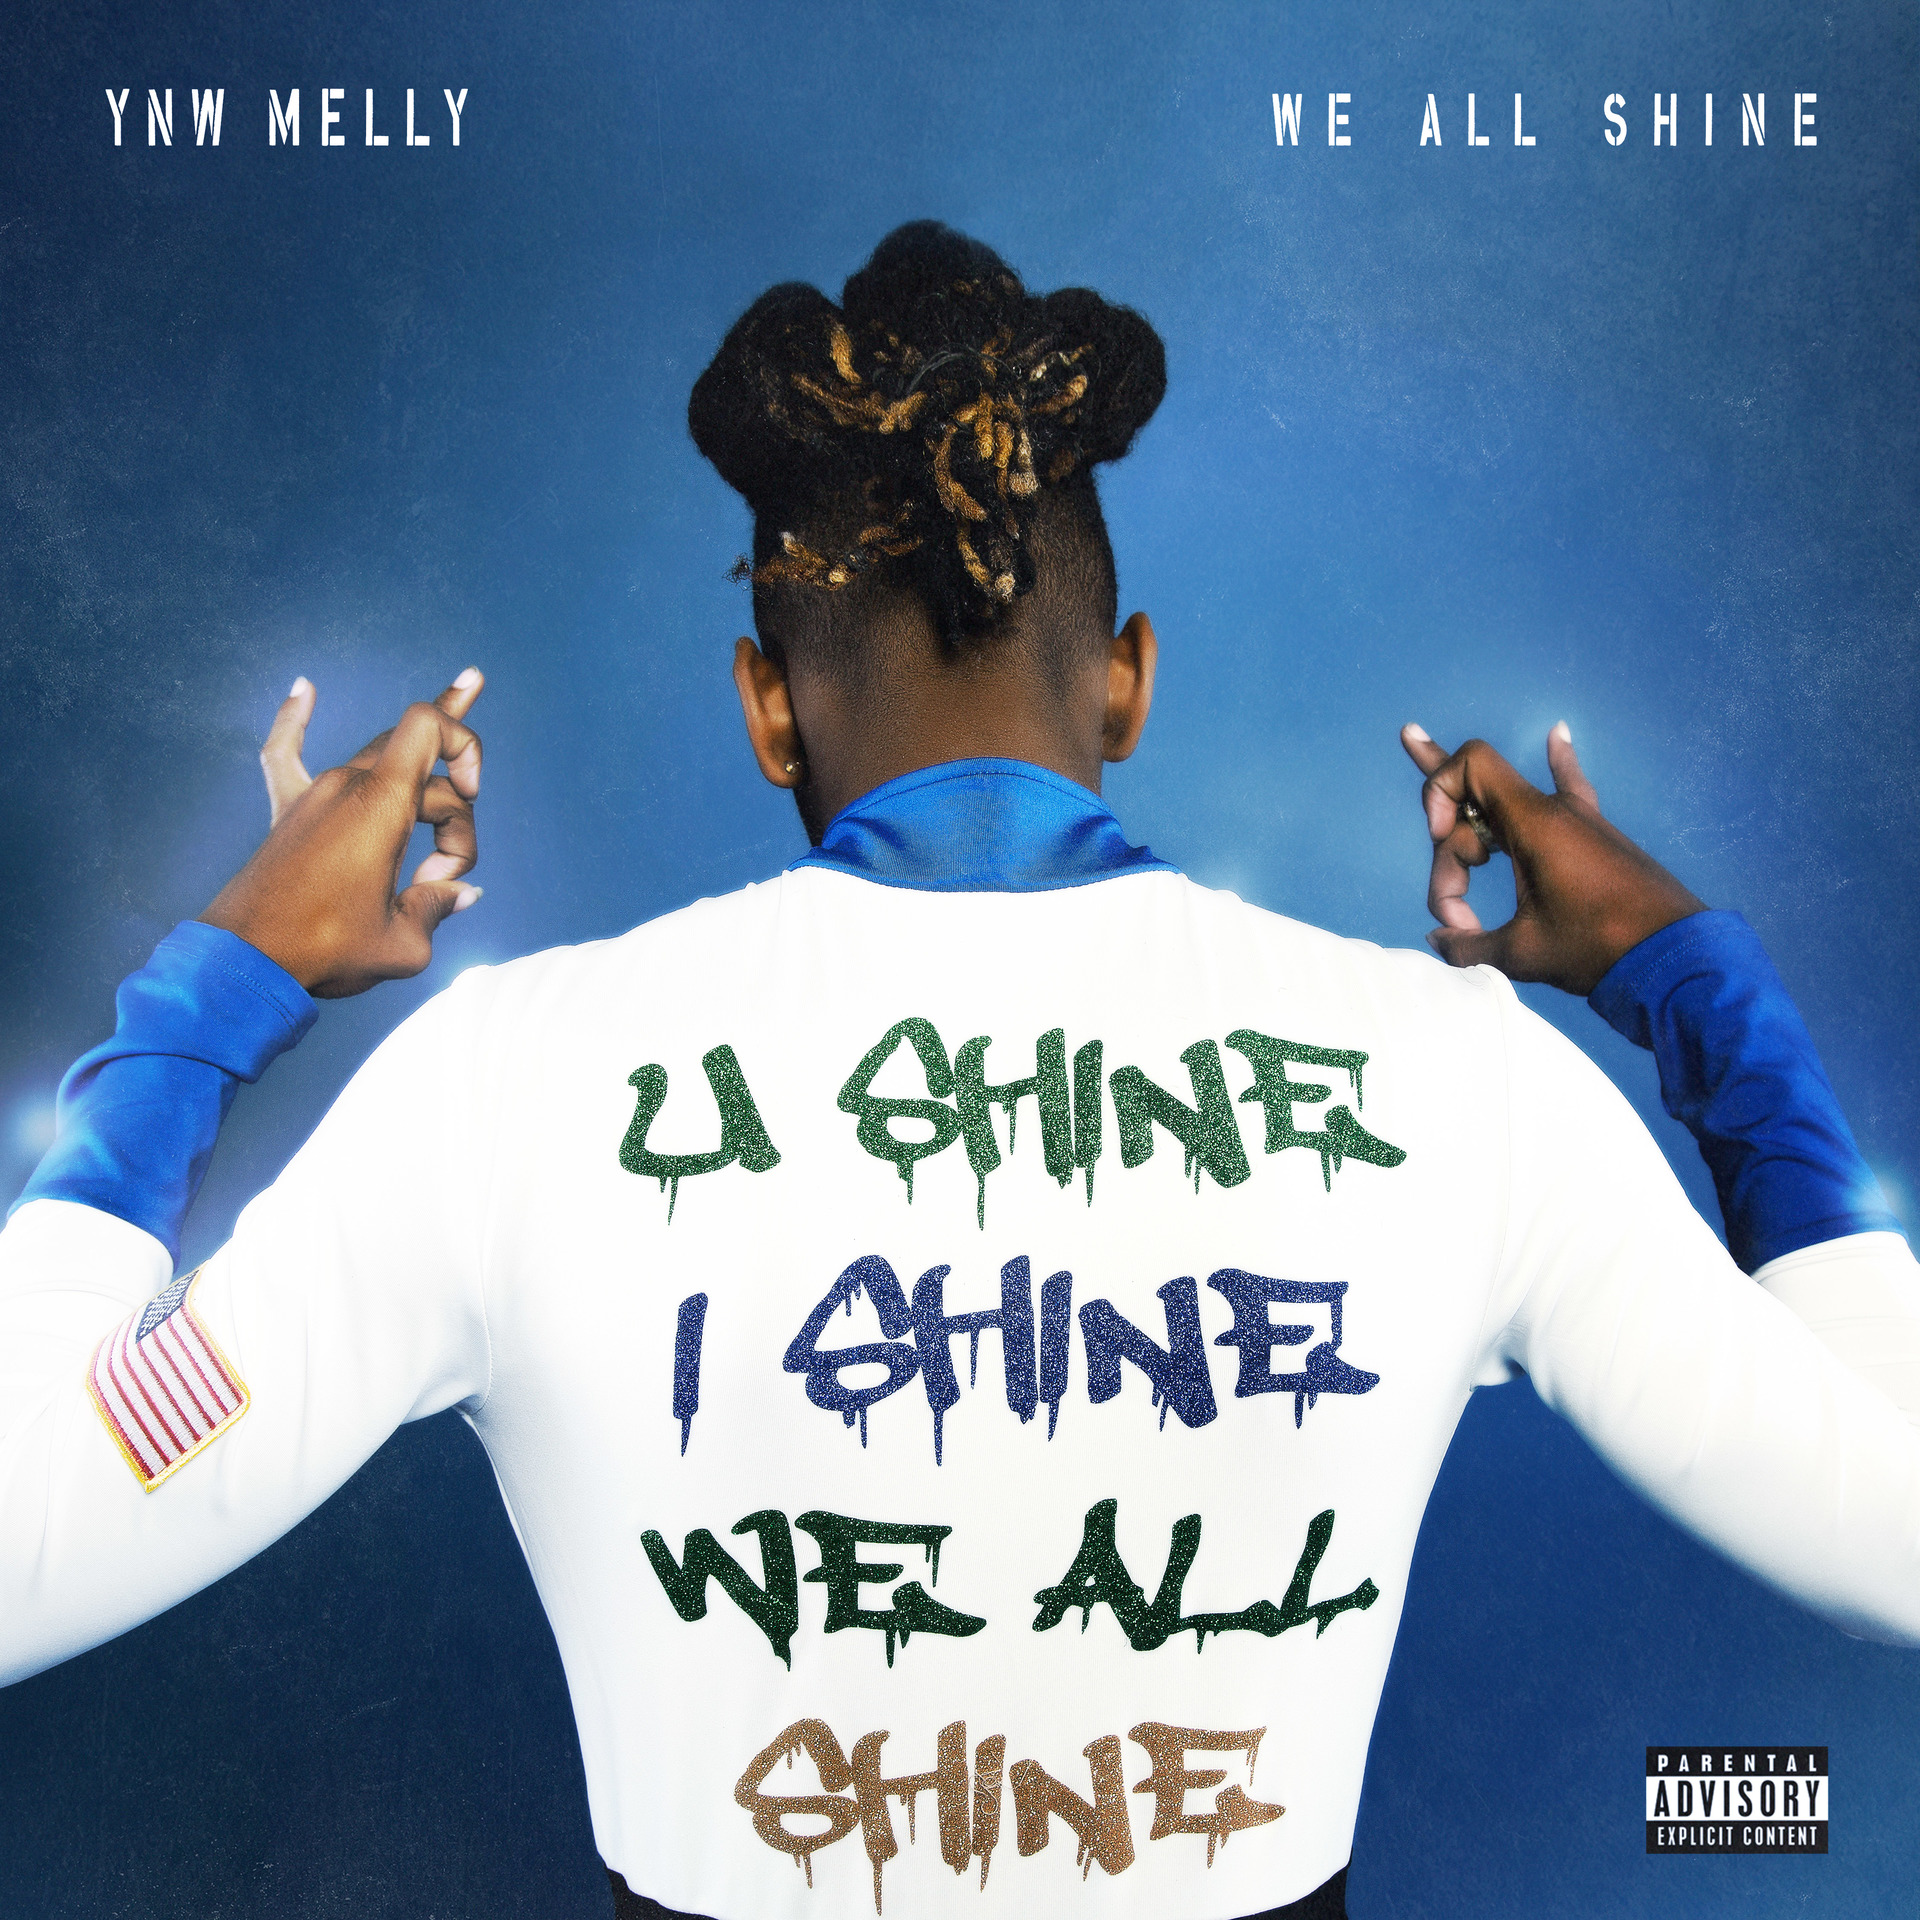 Kanye West & YNW Melly Team Up for "Mixed Personalities" Video & Melly Drops 'We All Shine' EP       